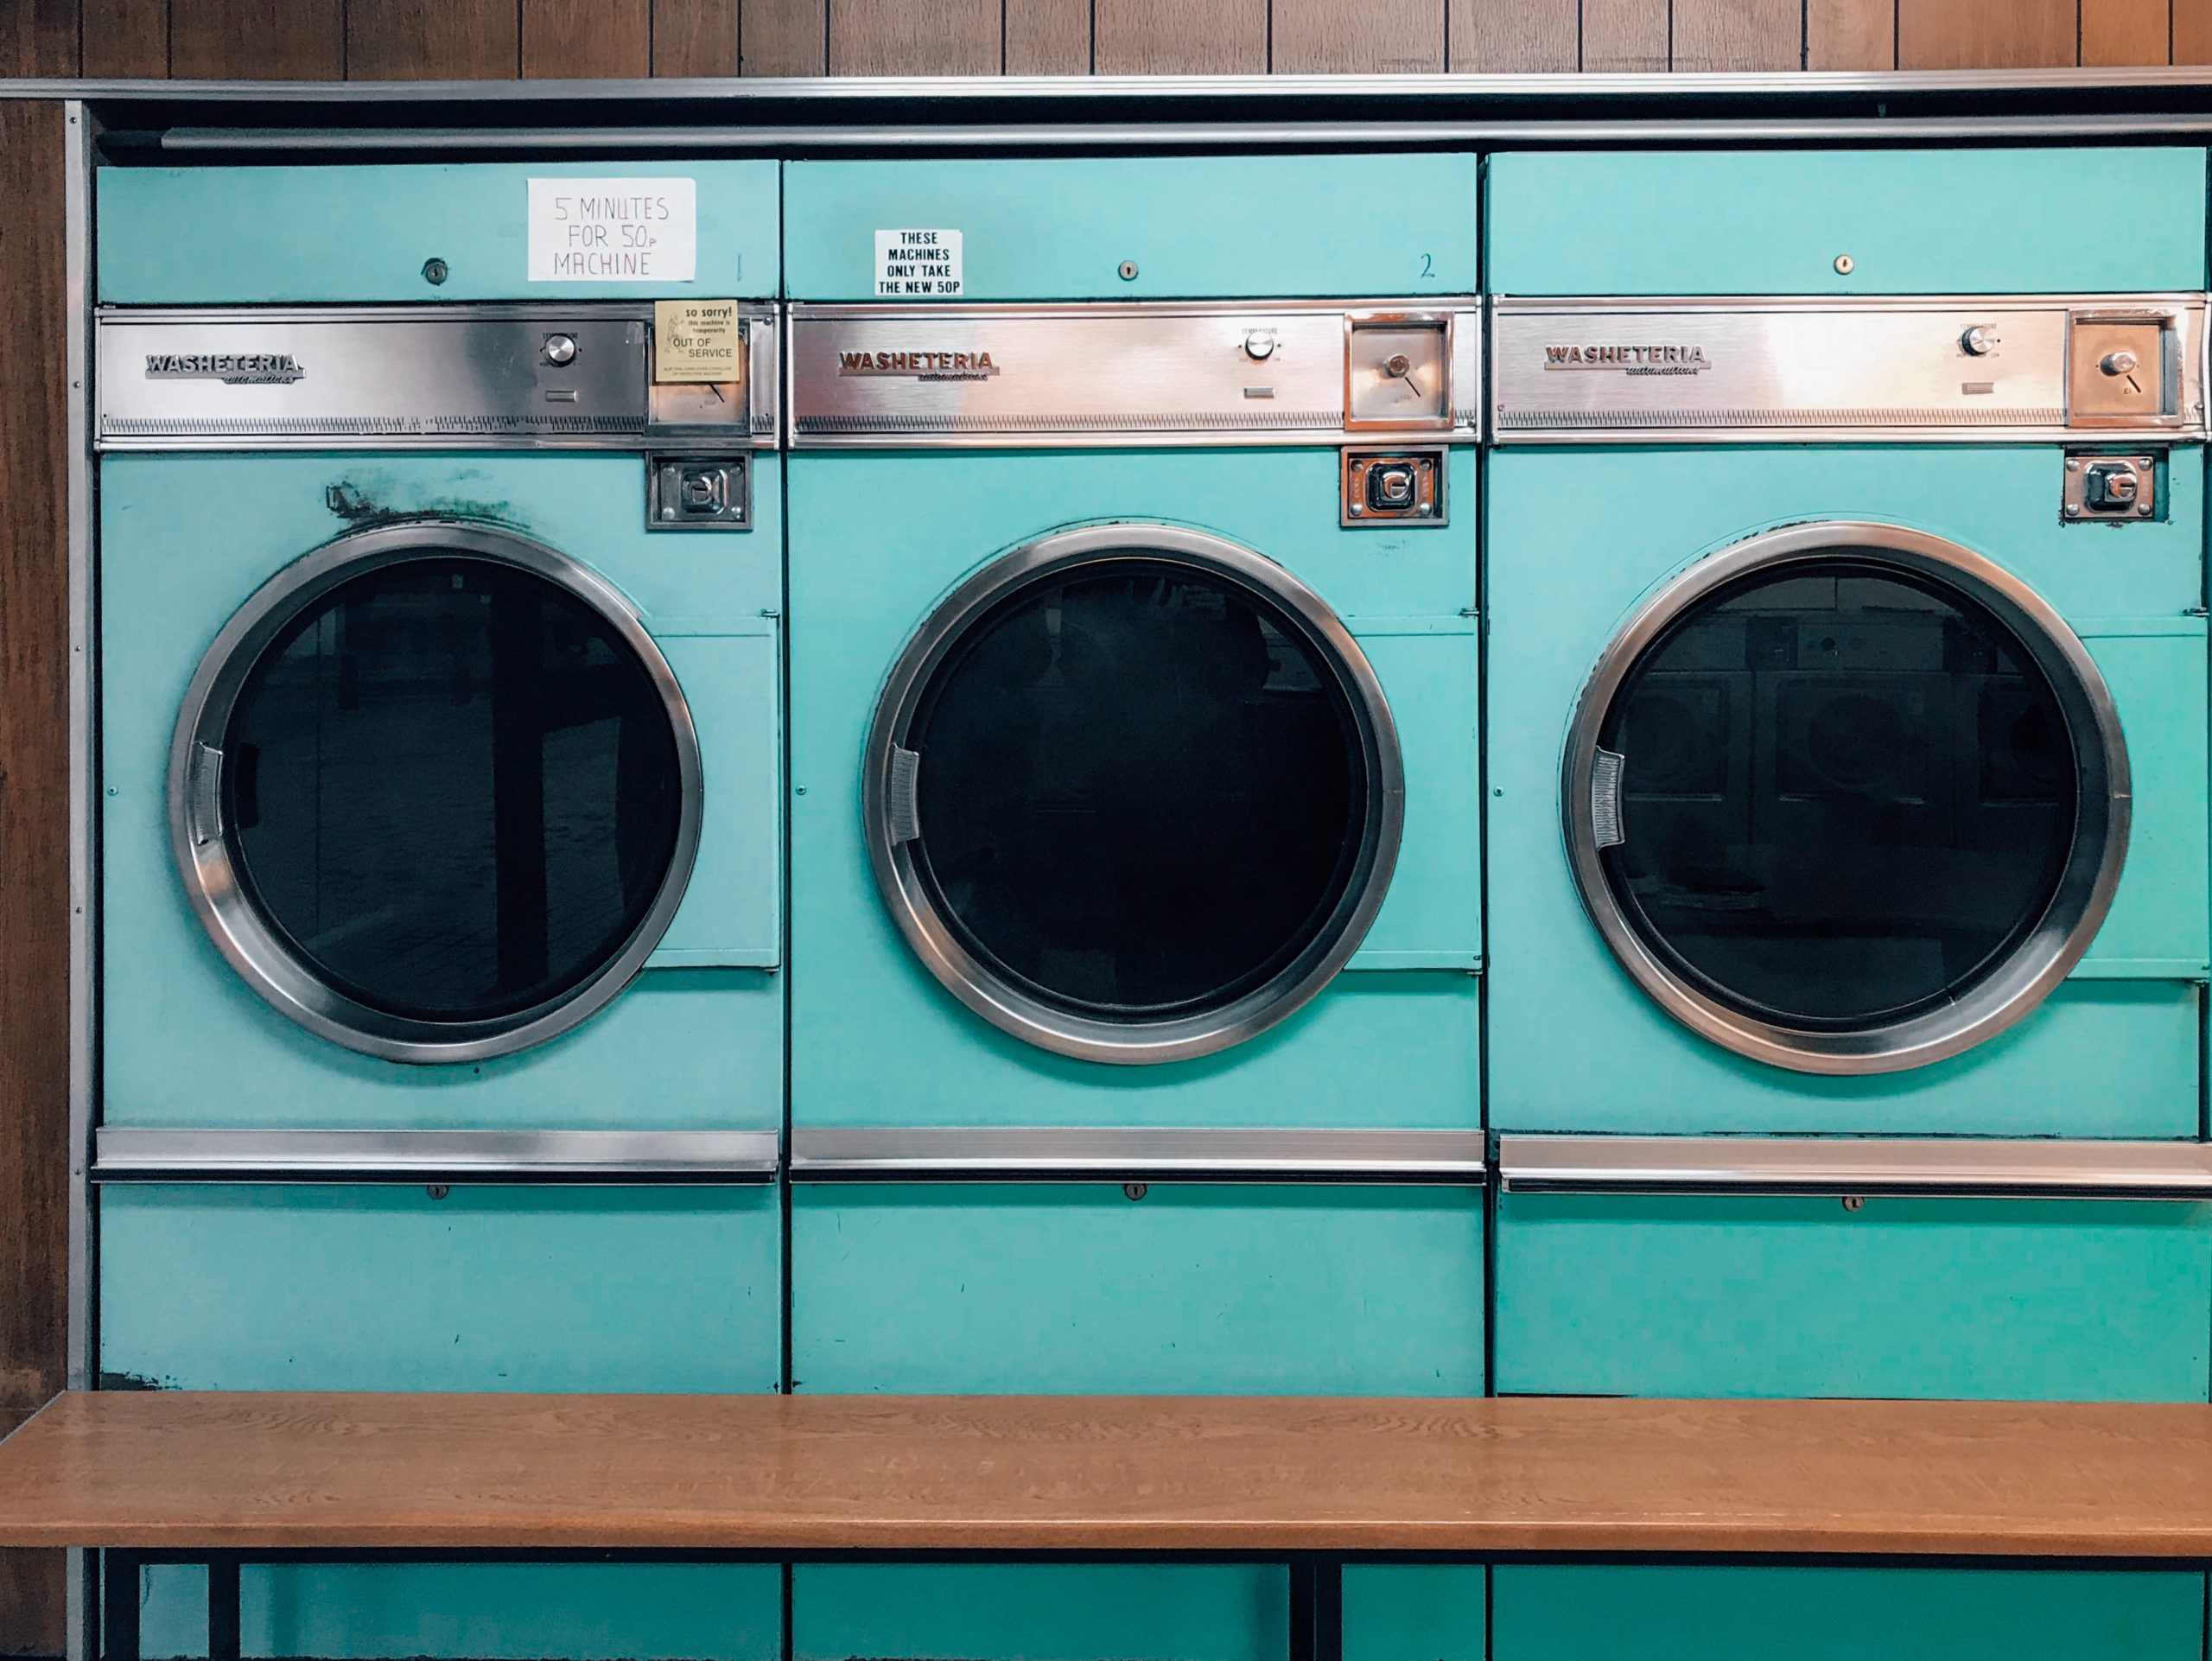 three aqua blue washing machines in a laundromat in article on how to use ebt cash benefits
